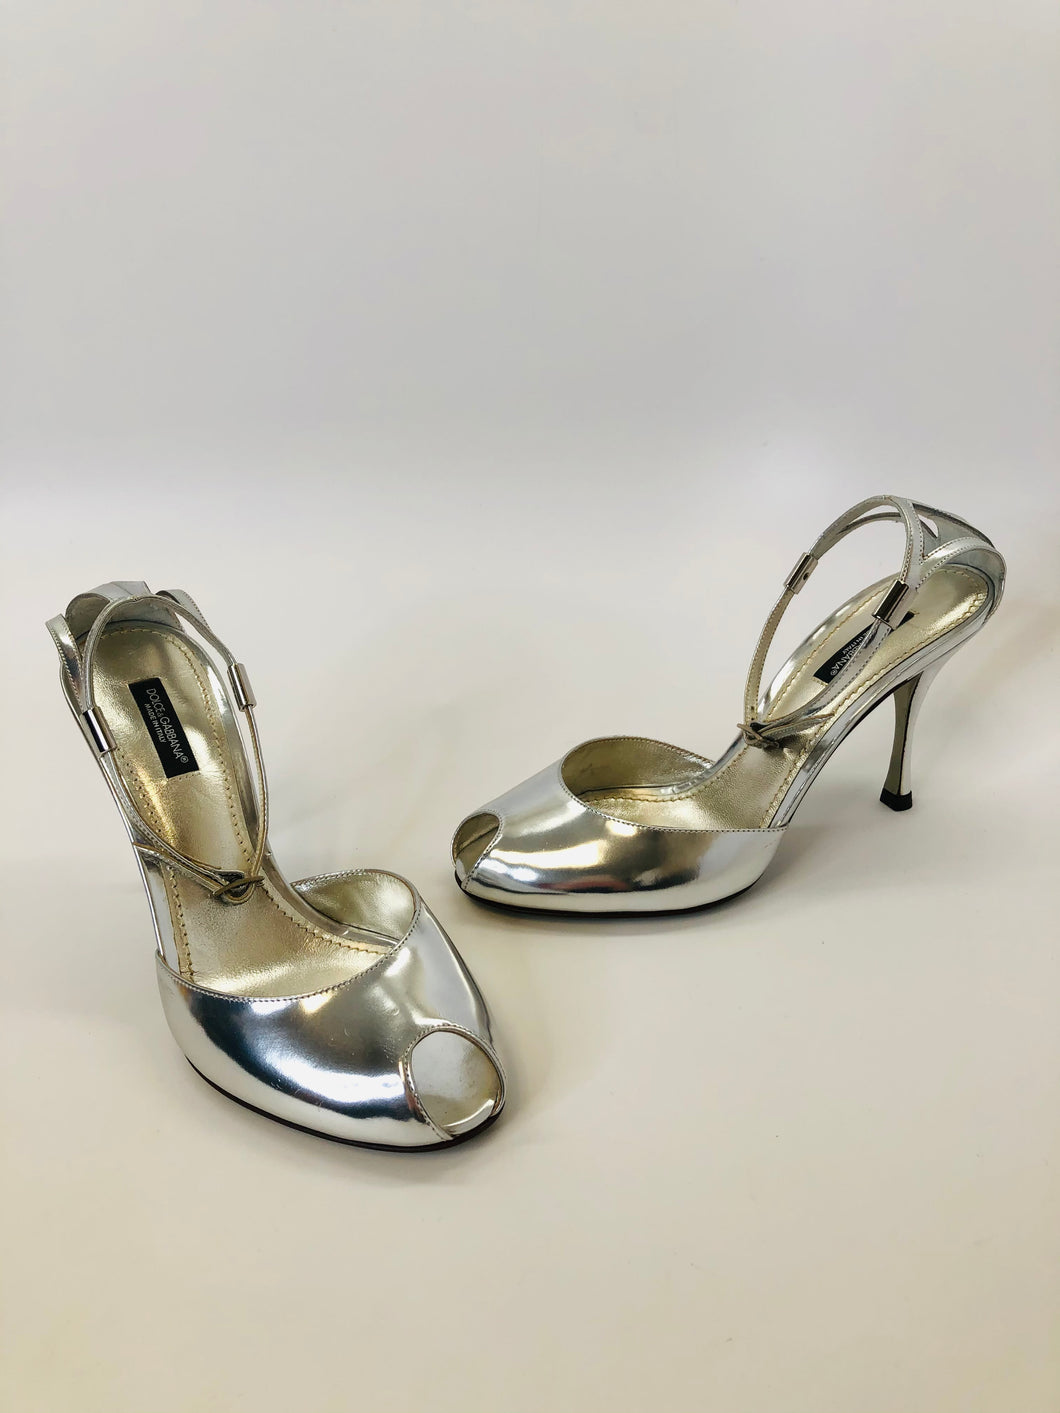 Dolce & Gabbana Silver Leather Sandals Size 37